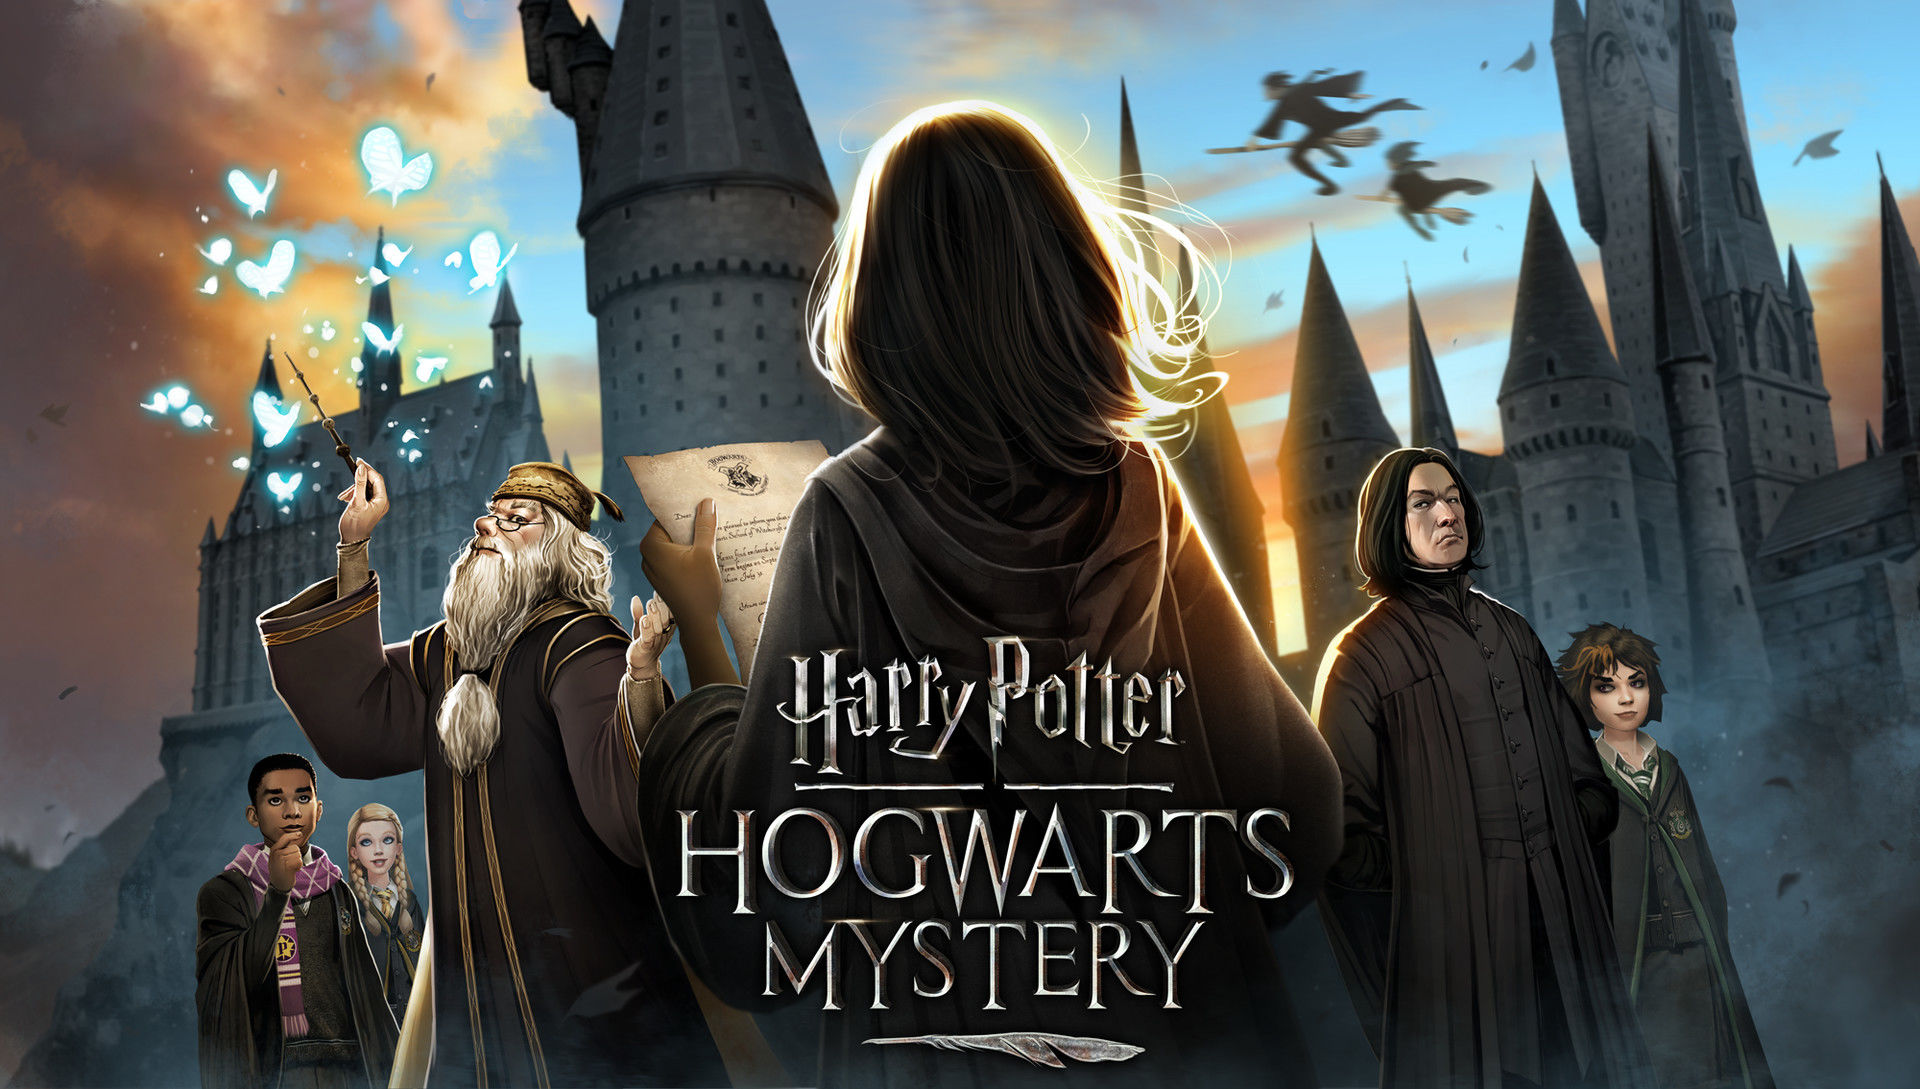 The Harry Potter Movies: The Intriguing World of Magical Art and Artists 2